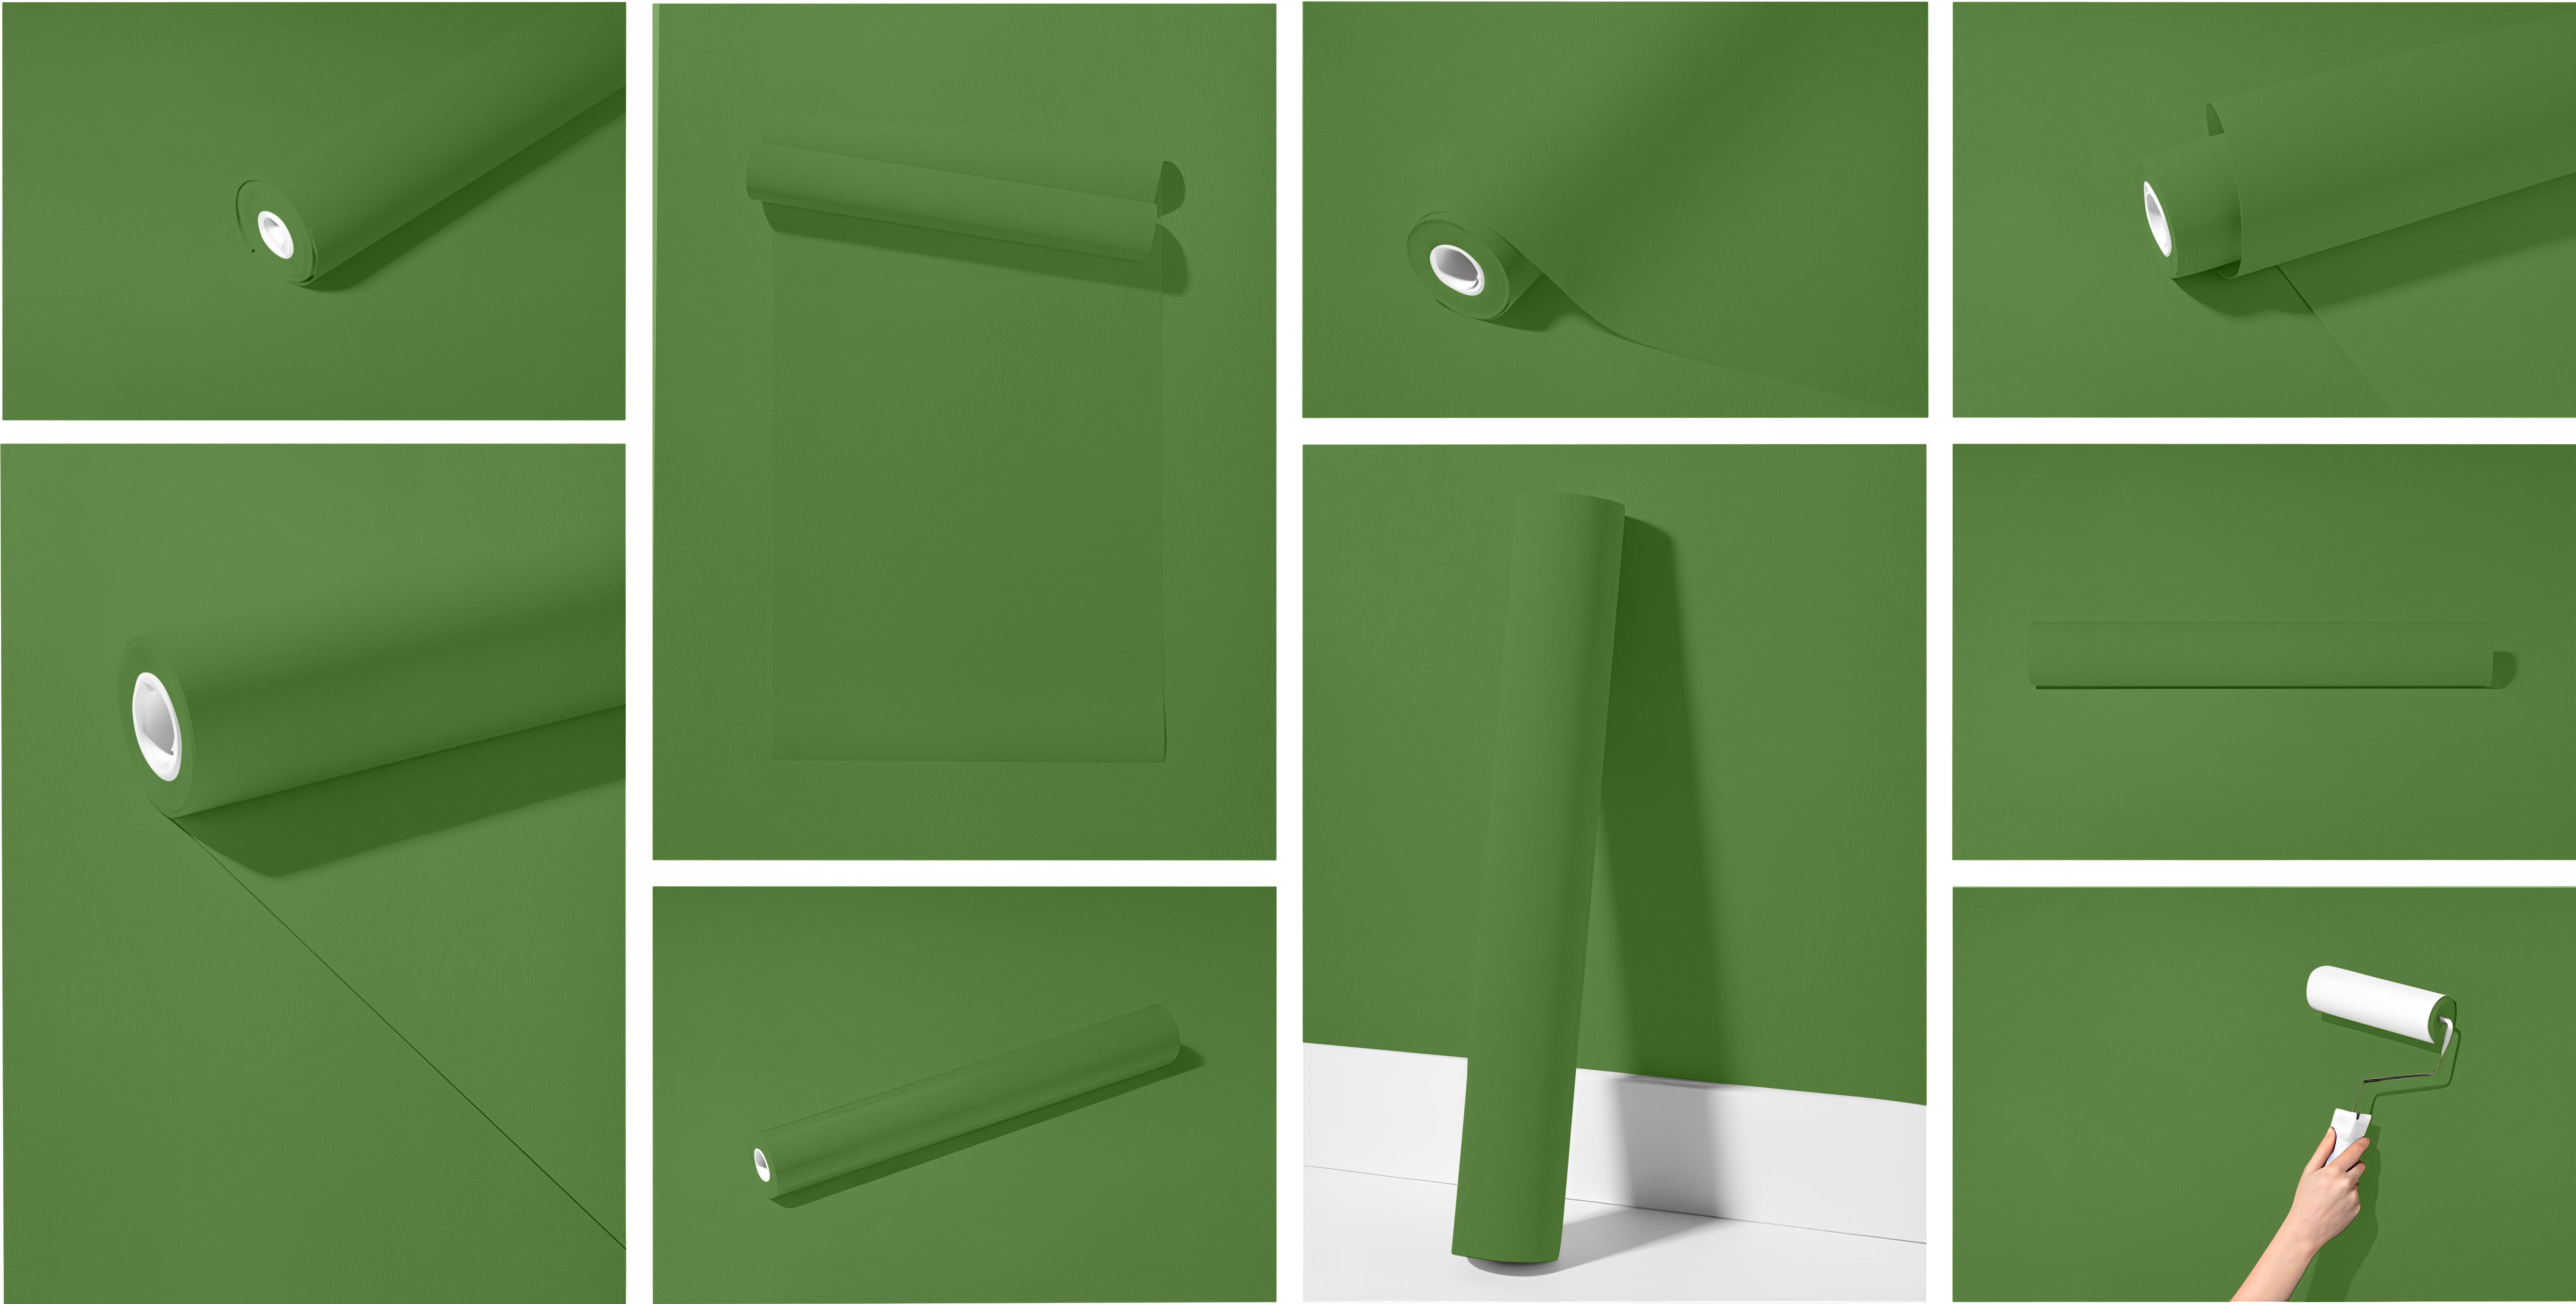 Peel & Stick Removable Re-usable Paint - Color RAL 6017 May Green - offRAL™ - RALRAW LLC, USA